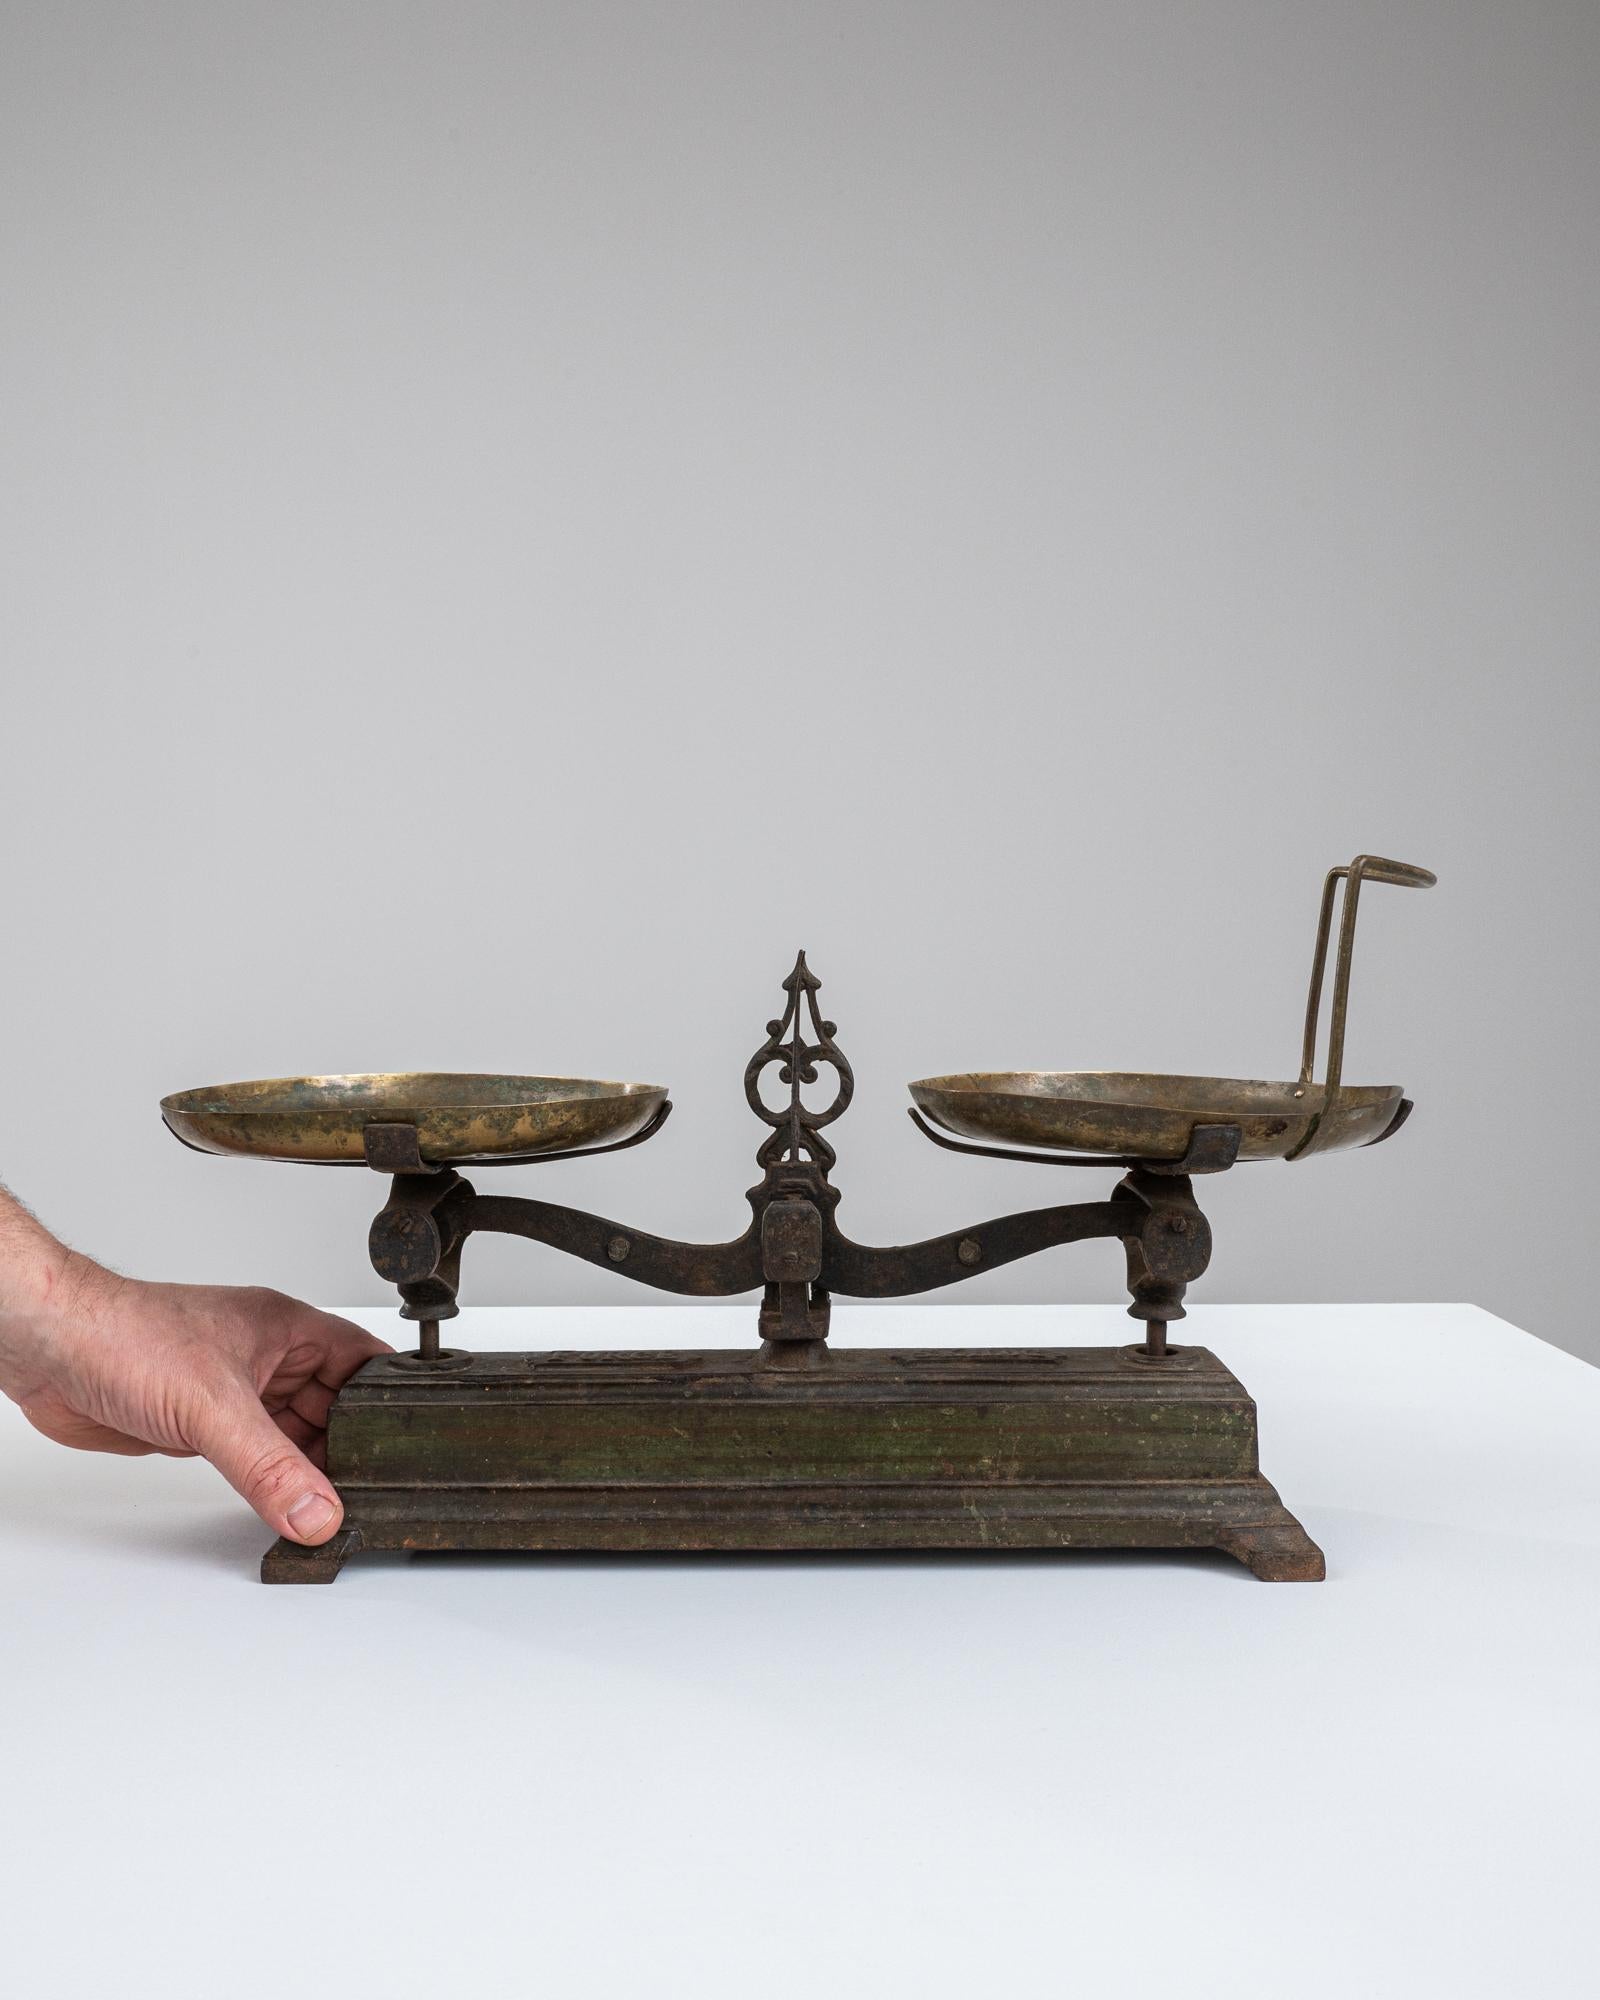 Step back in time with this authentic 19th Century French Metal Scale, a testament to the enduring quality and craftsmanship of a bygone era. With its ornate metalwork and robust brass pans, this scale is not just a measuring device but a piece of